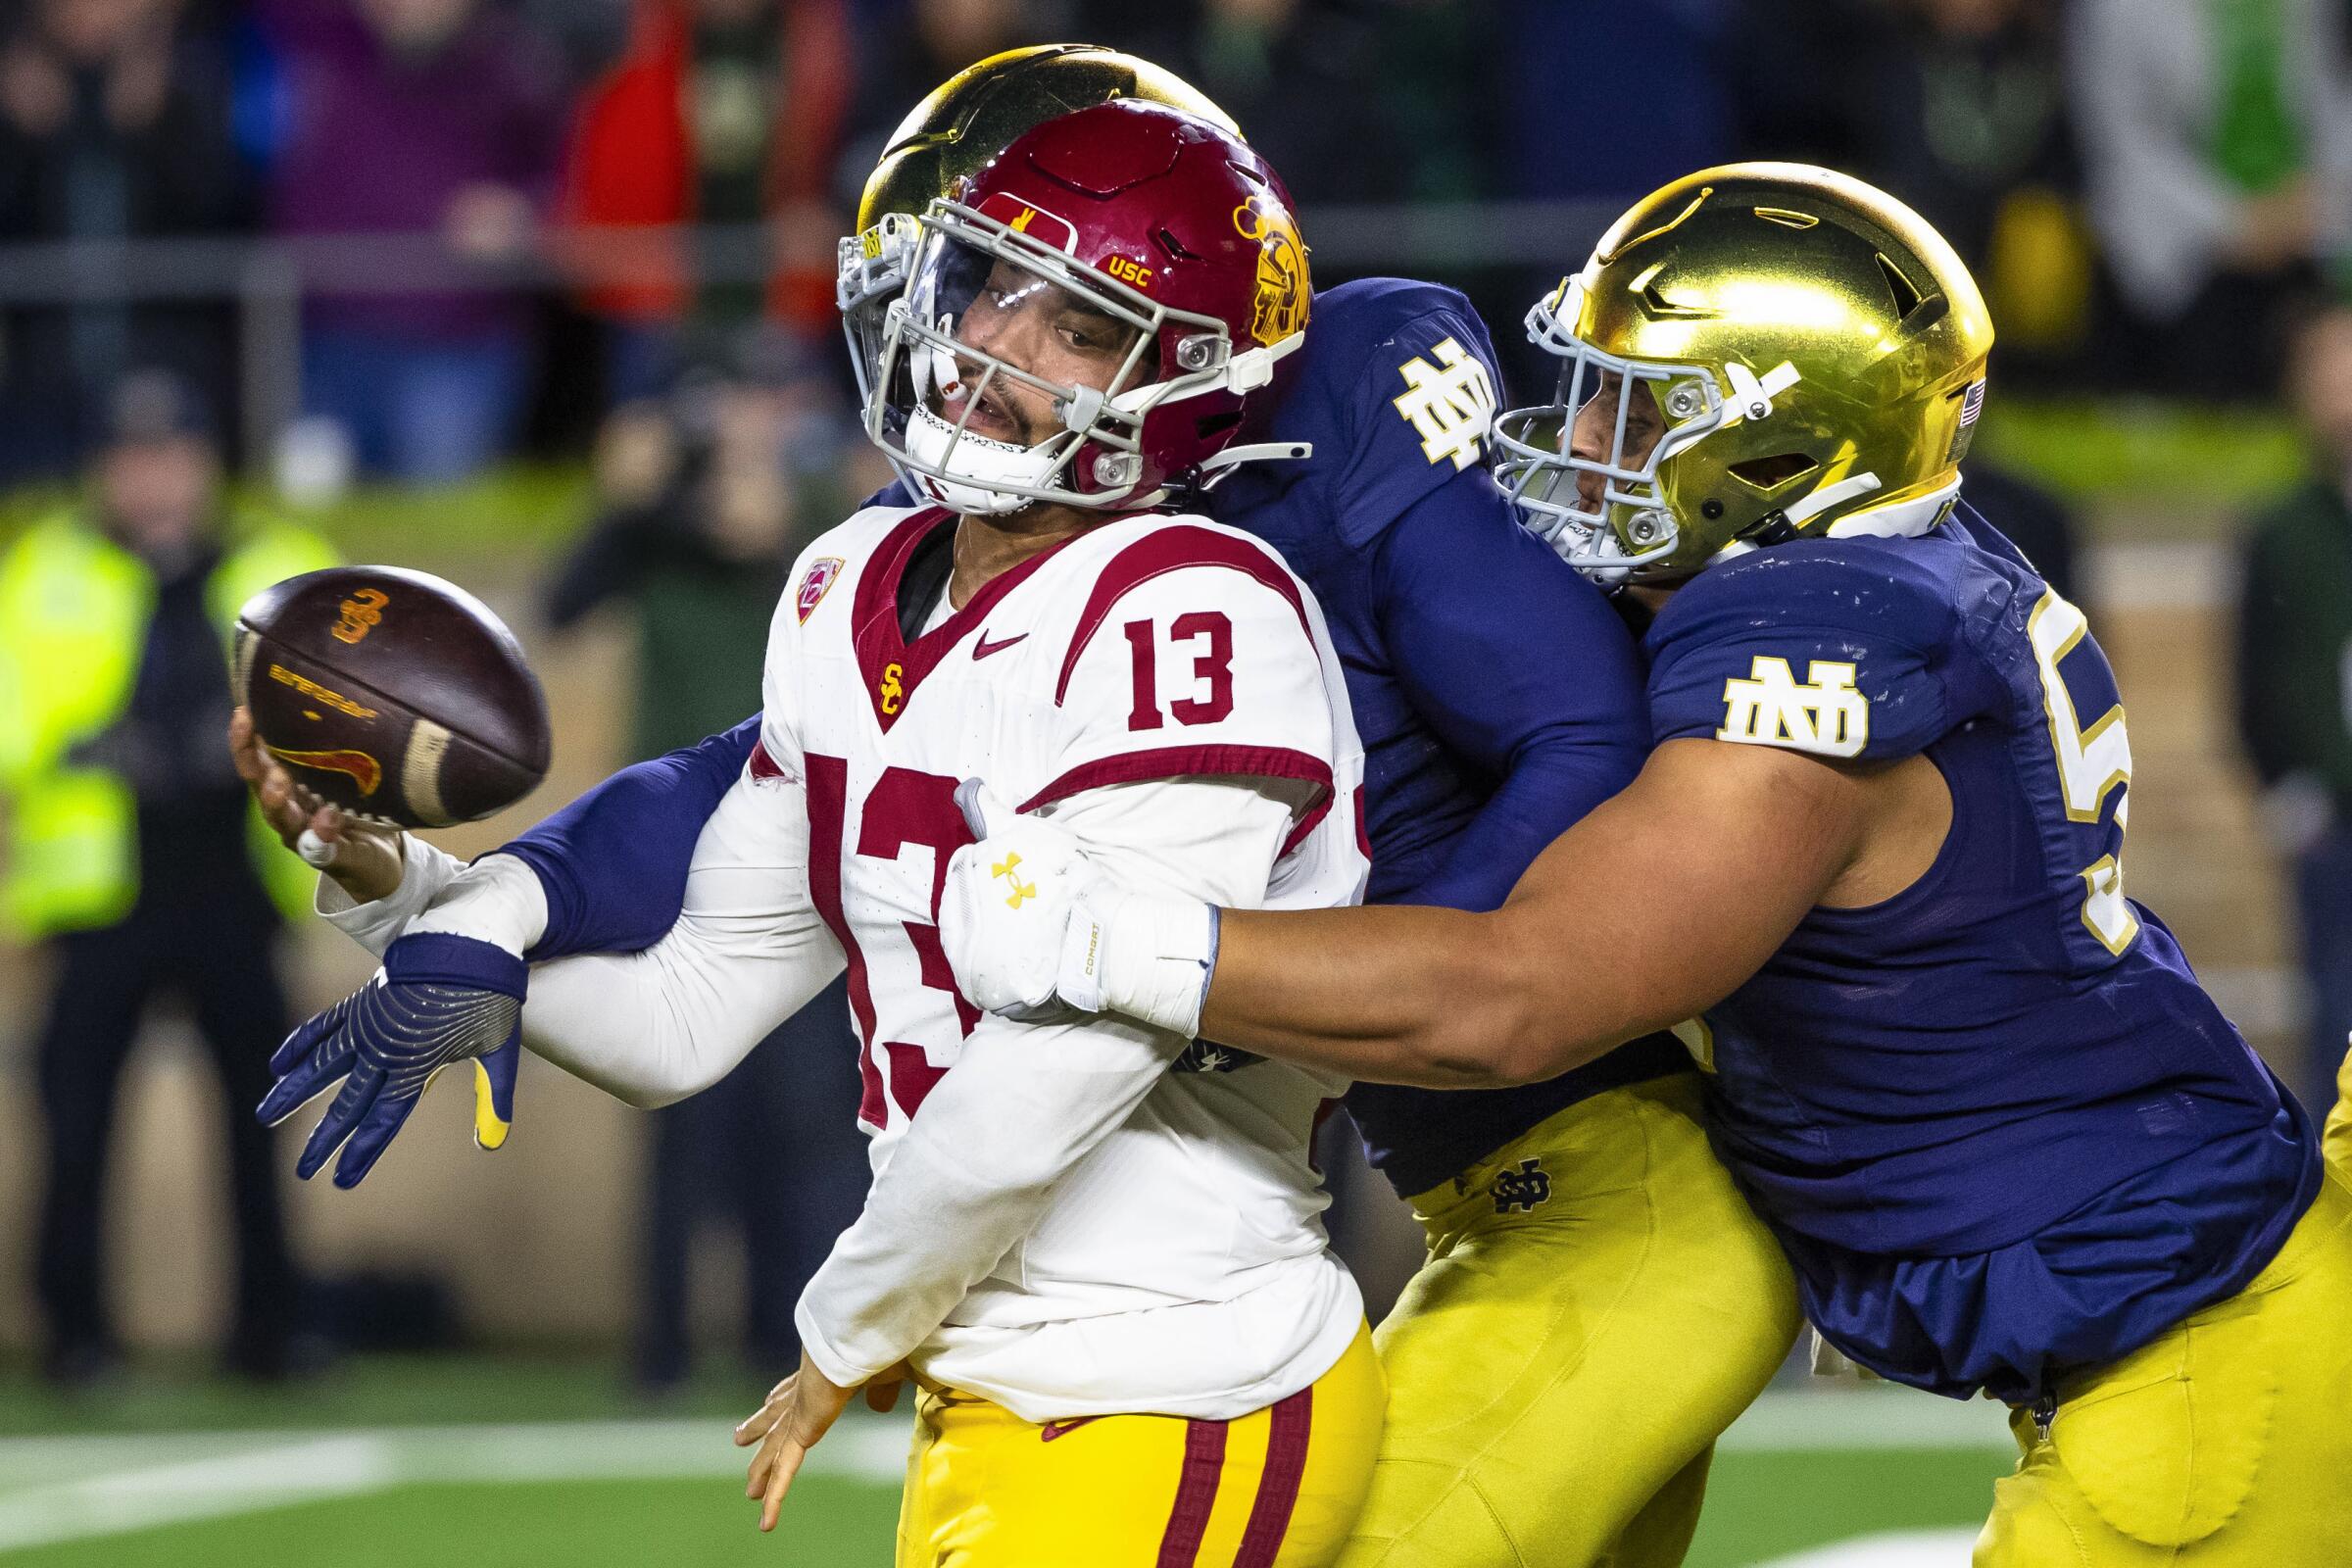 USC takeaways: Offensive line miscues helped fuel ugly loss - Los